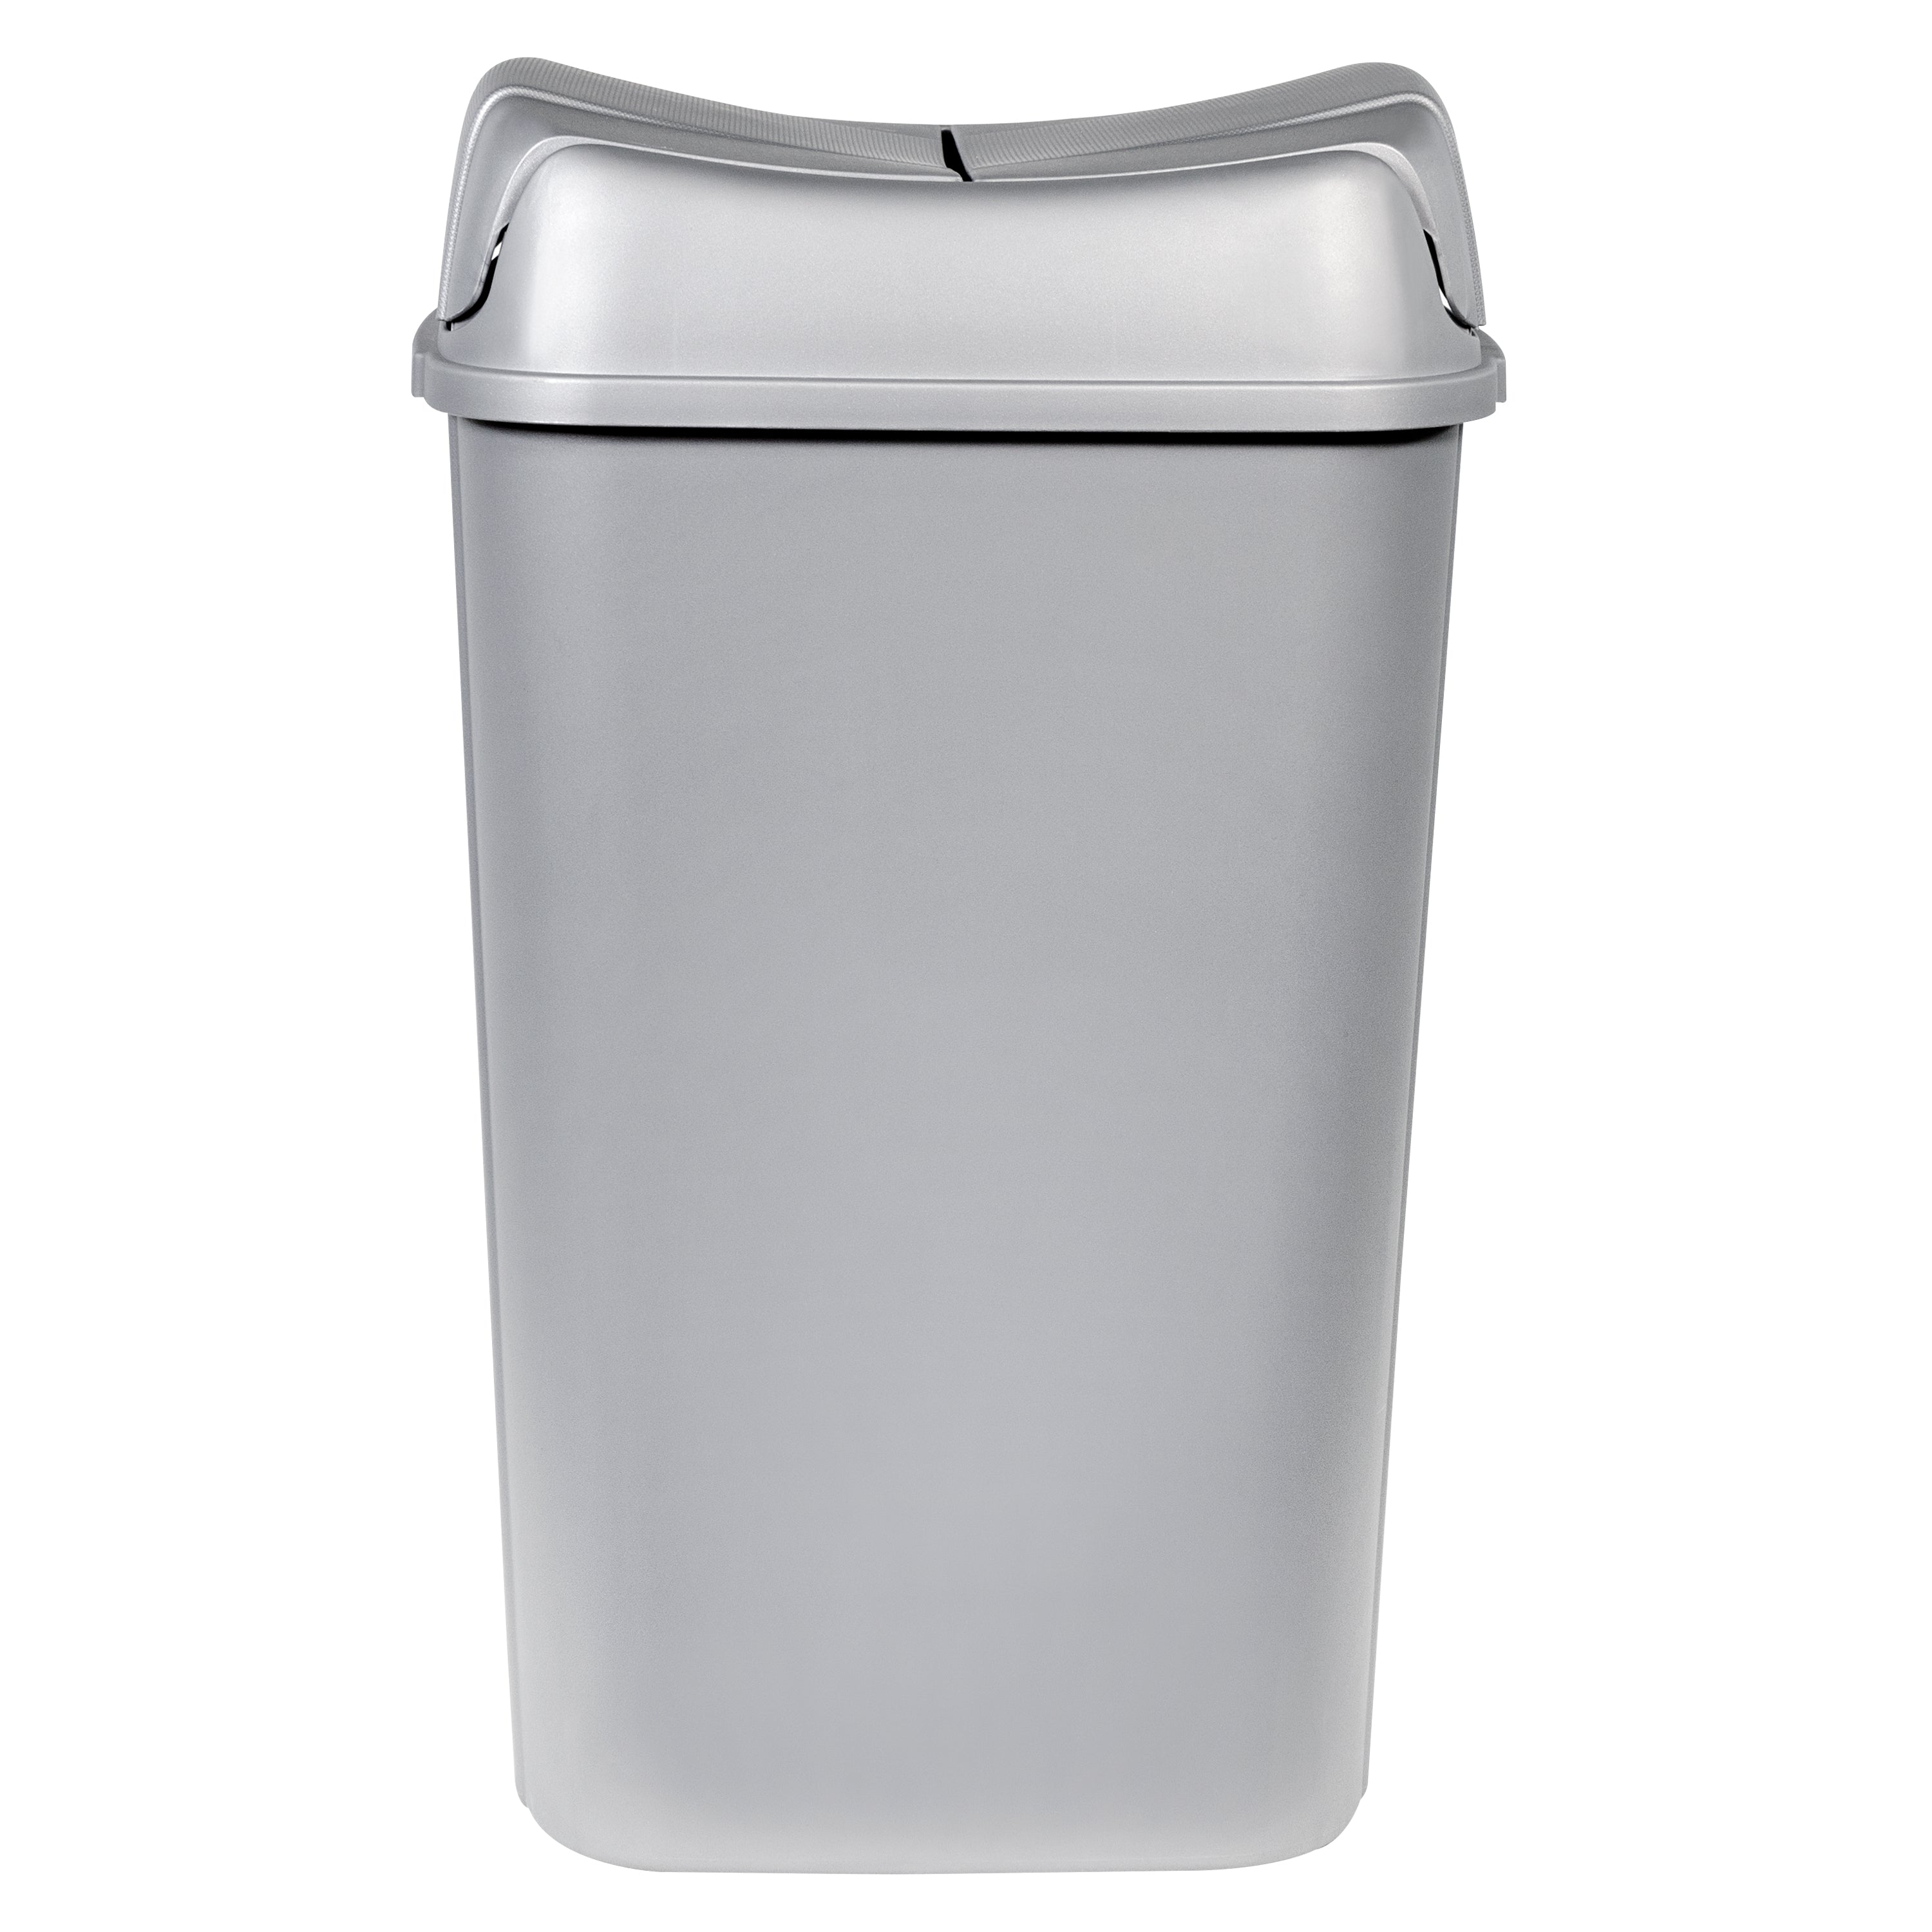 Hefty 13.3 Gallon Trash Can, Plastic Touch Top Kitchen Trash Can, White 